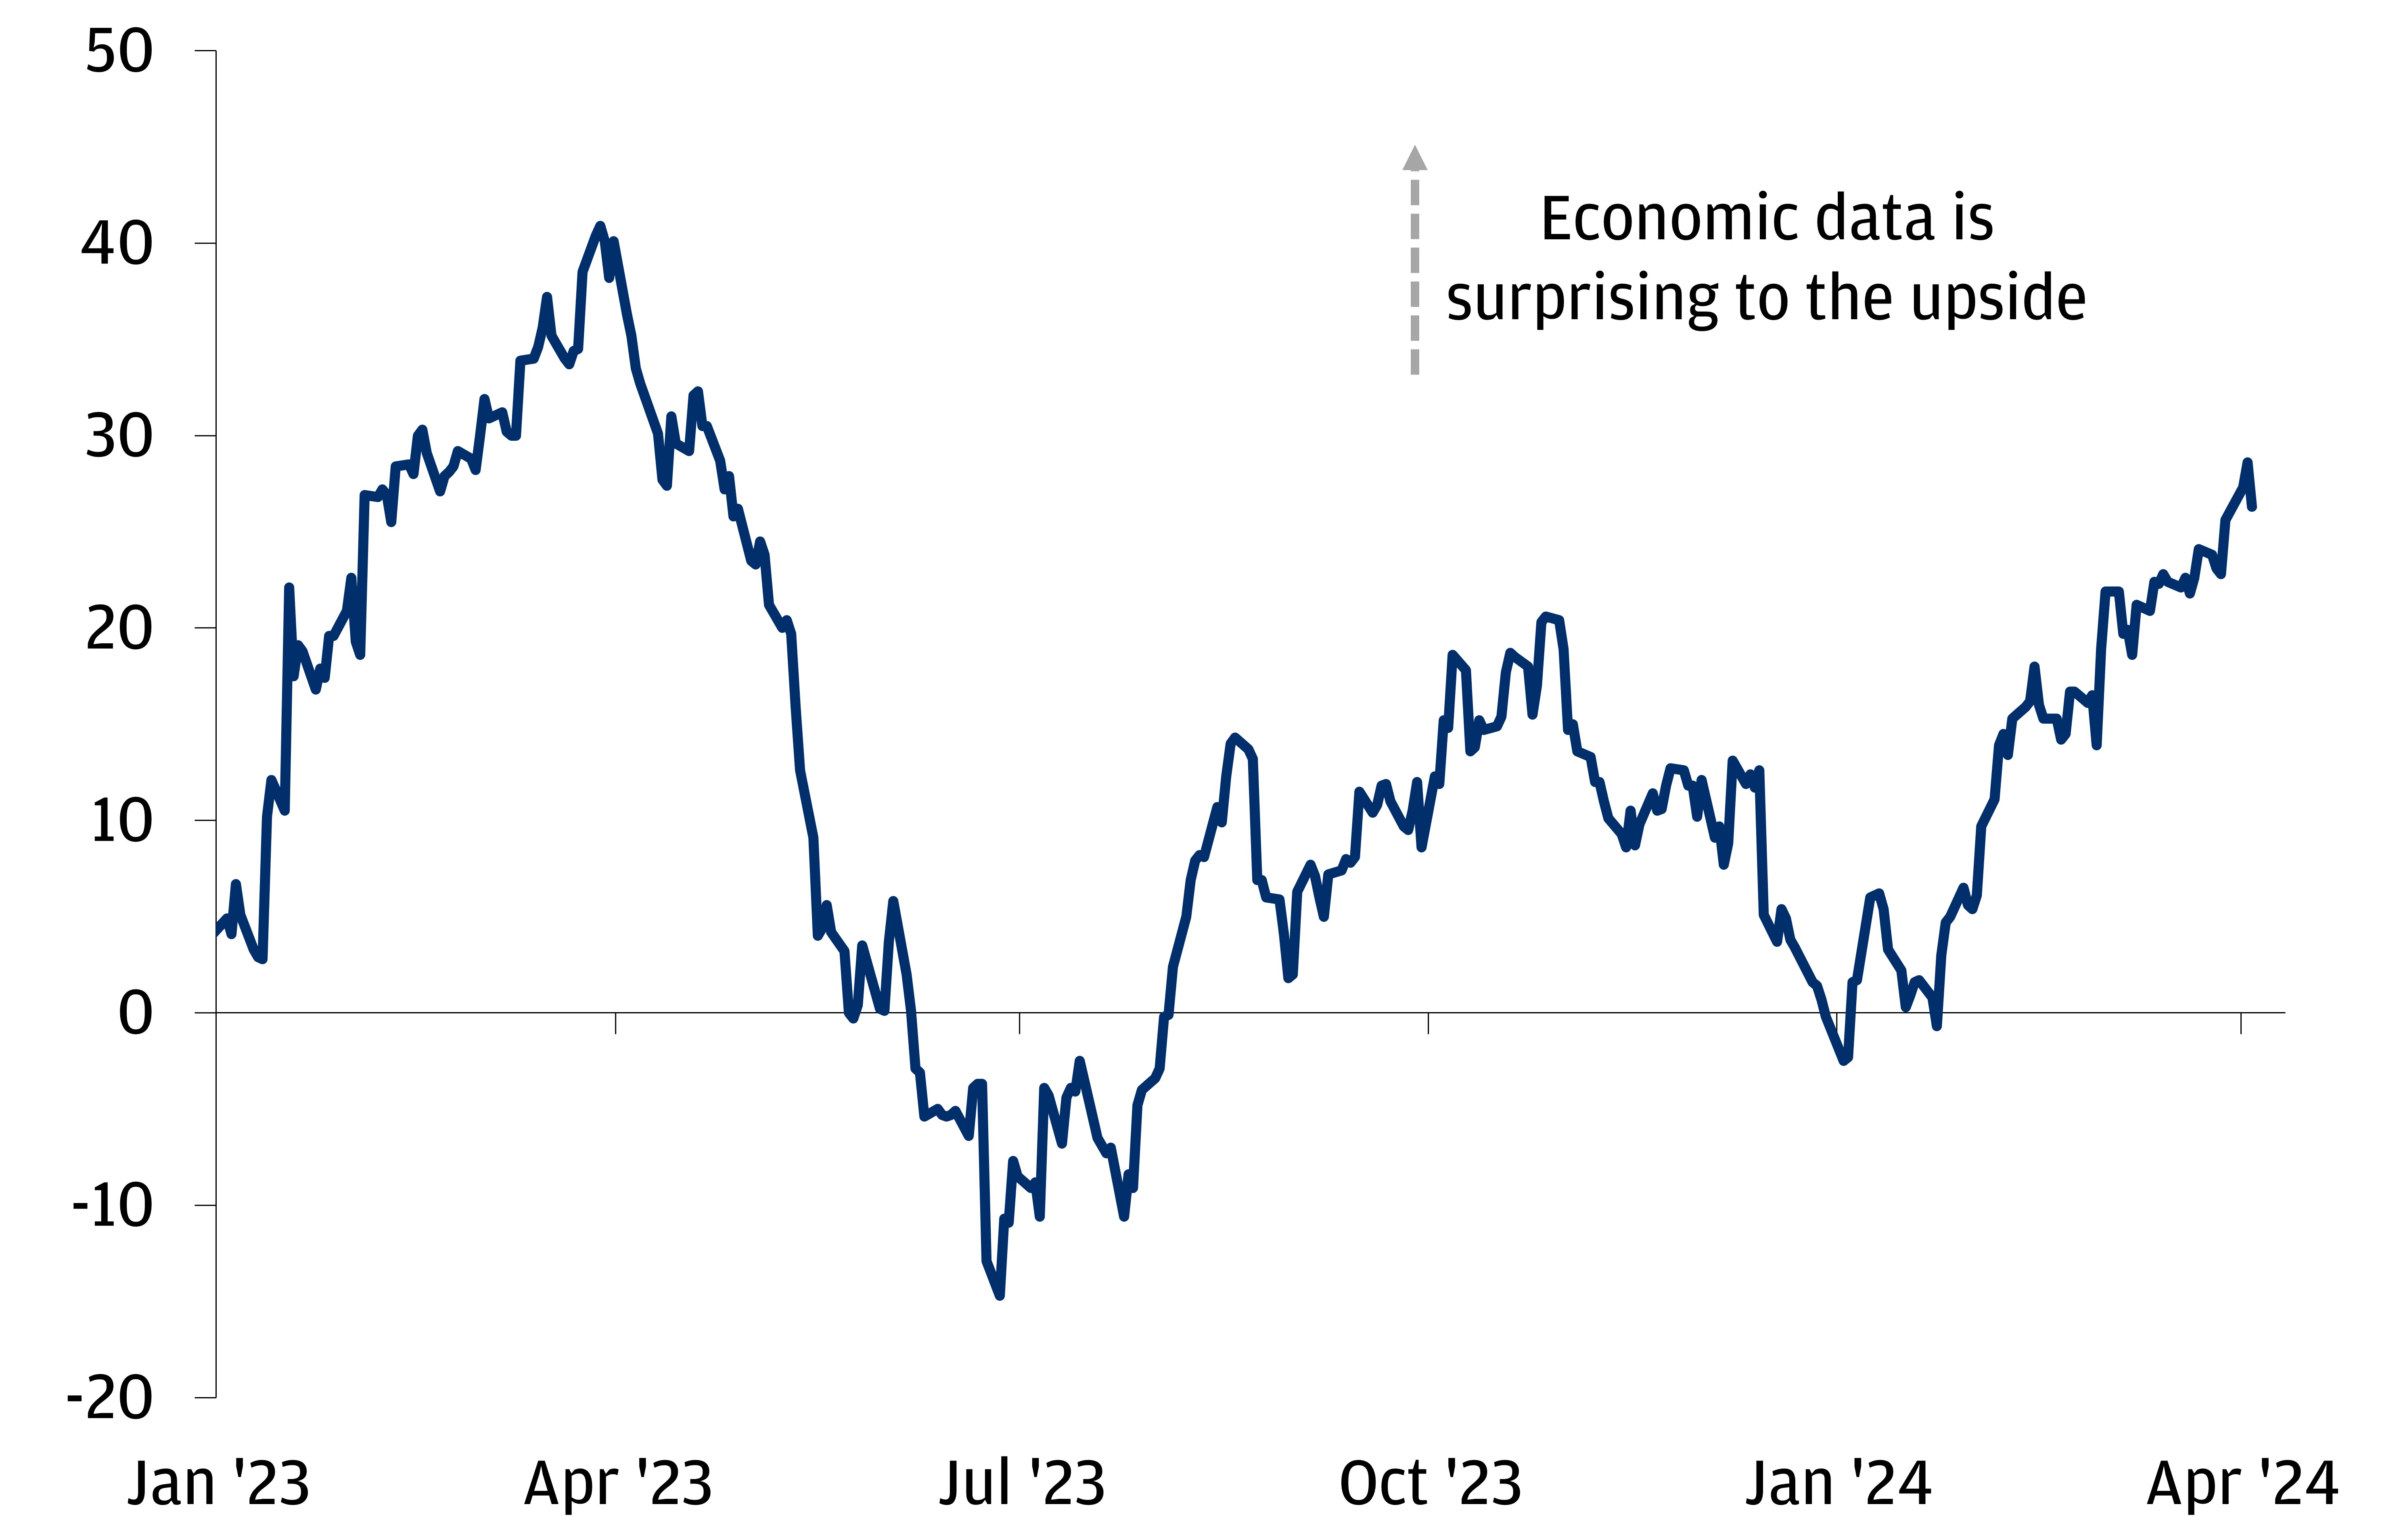 This chart shows the Citi Global Economic Surprise Index level from January 2023 through April 2024. 